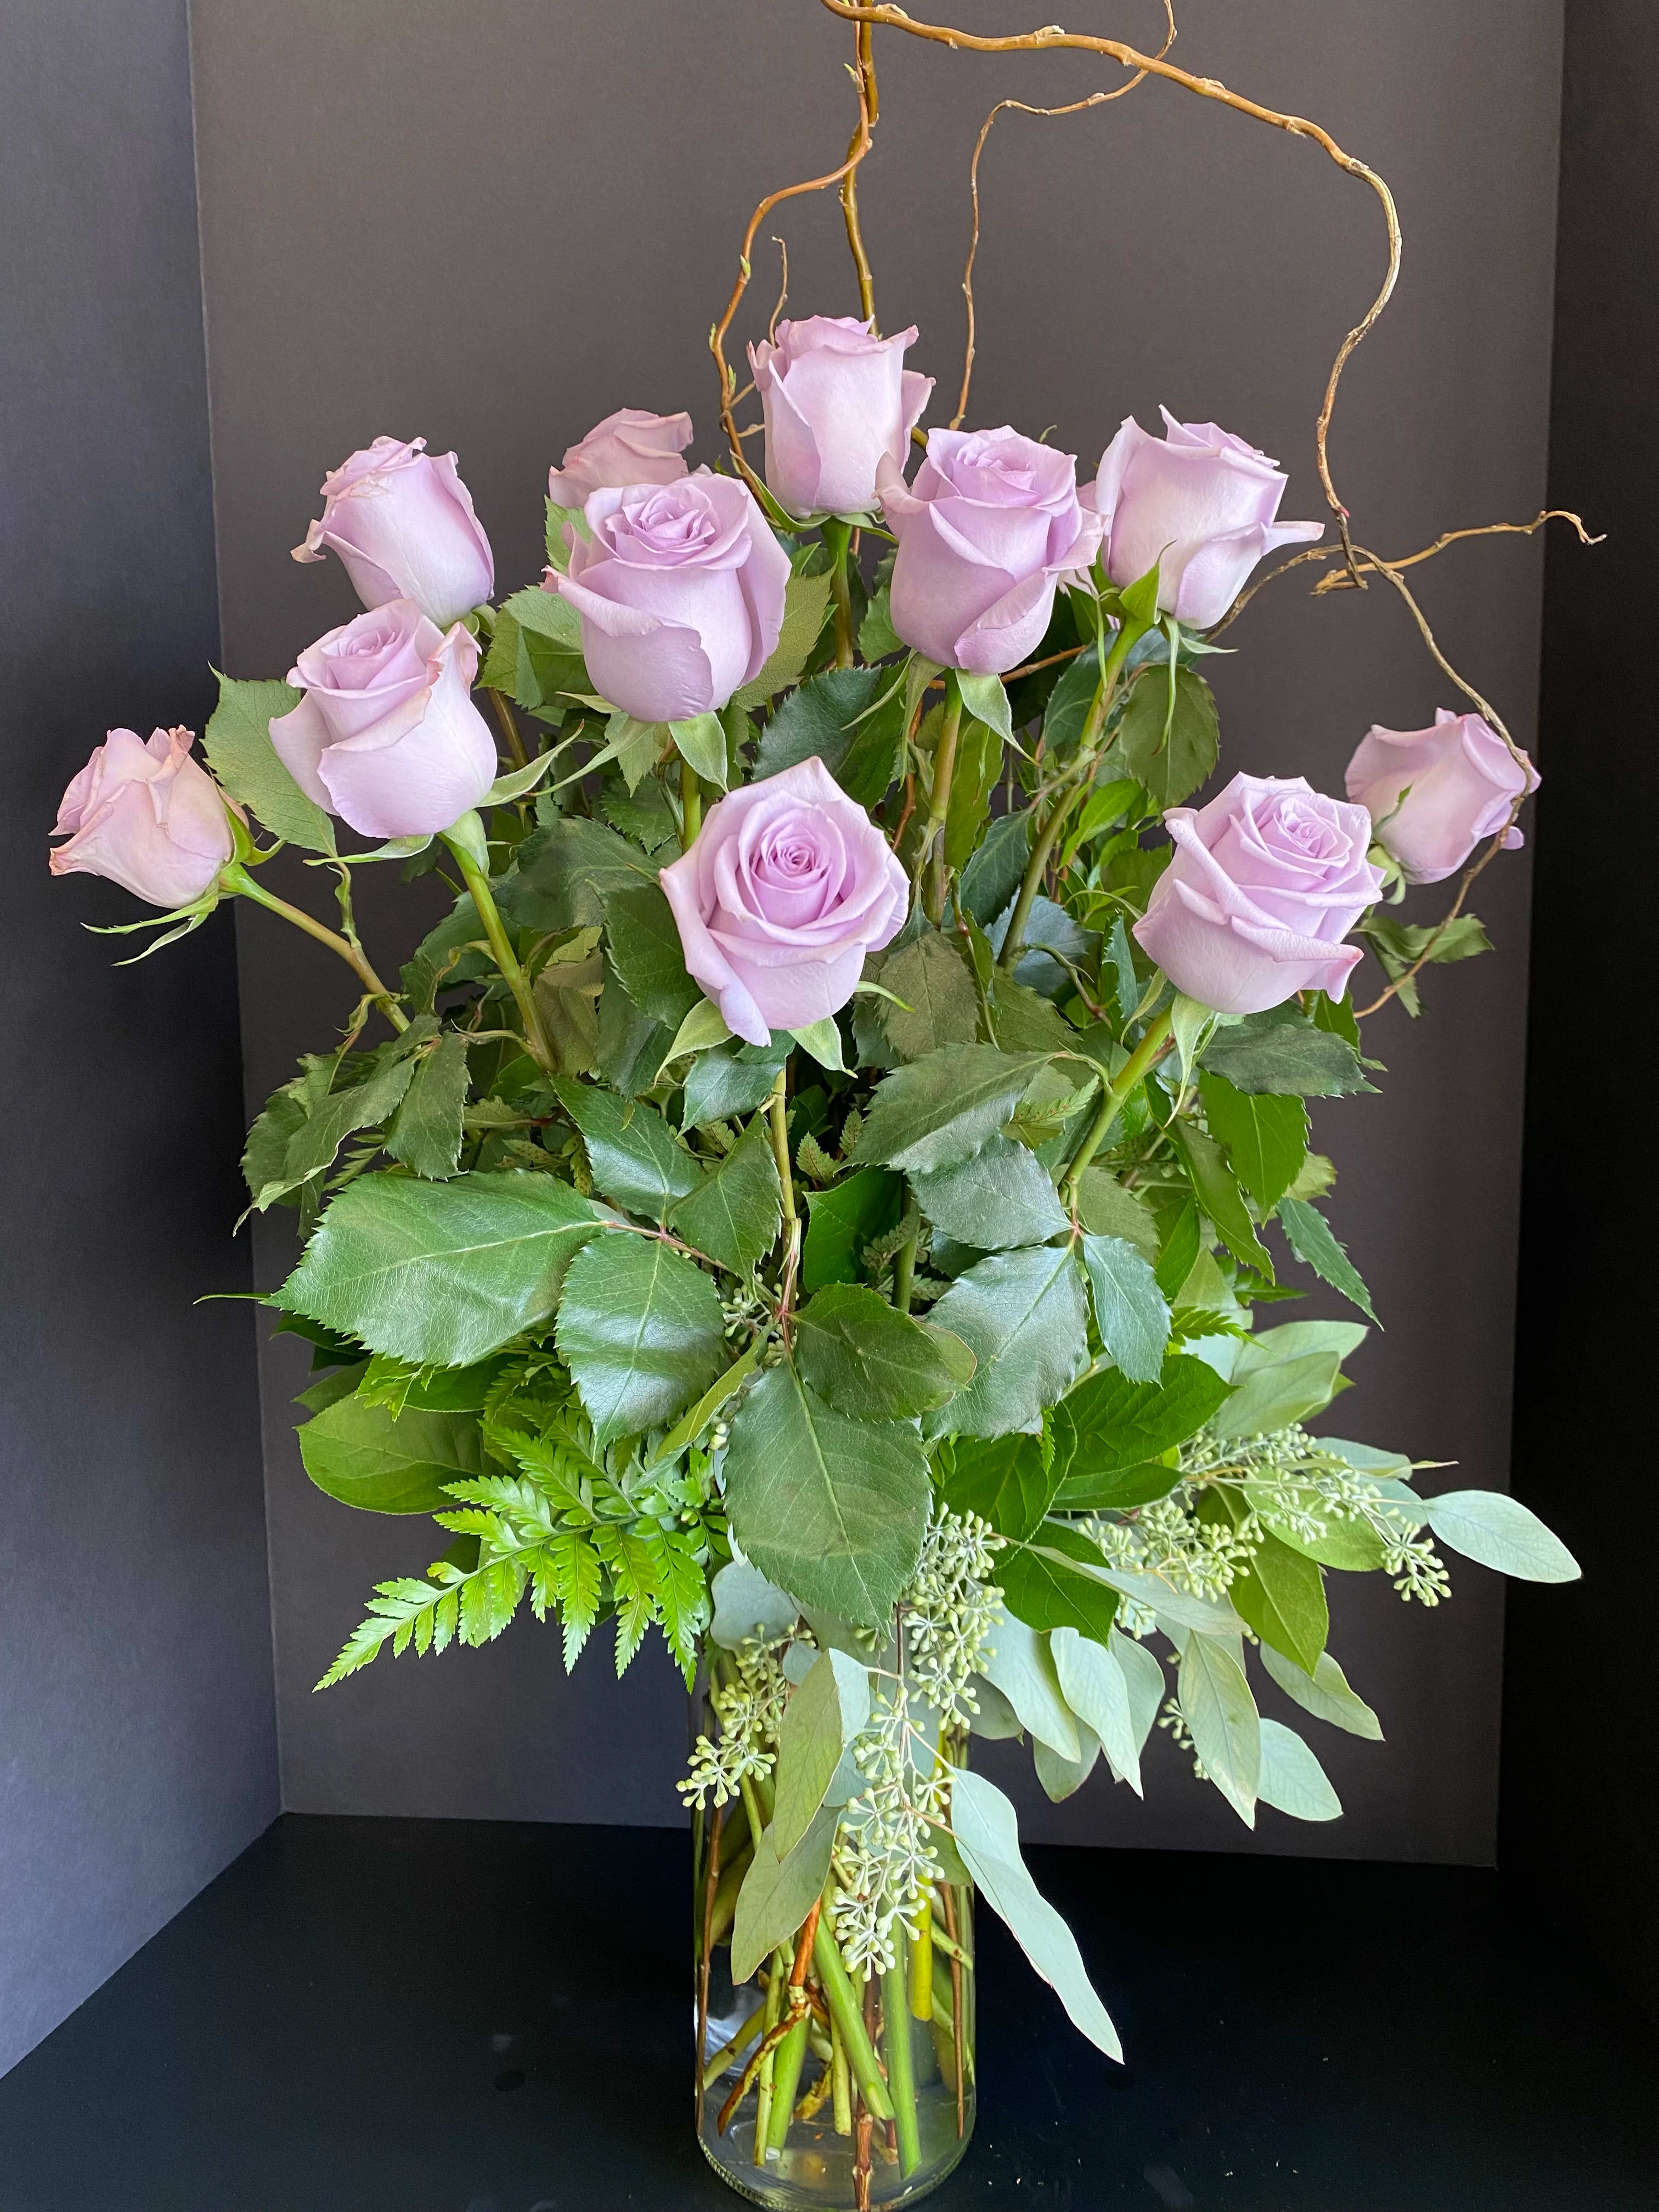 Dozen Lavender Roses - Lavender Roses with Greenery Arranged in a Glass Vase.